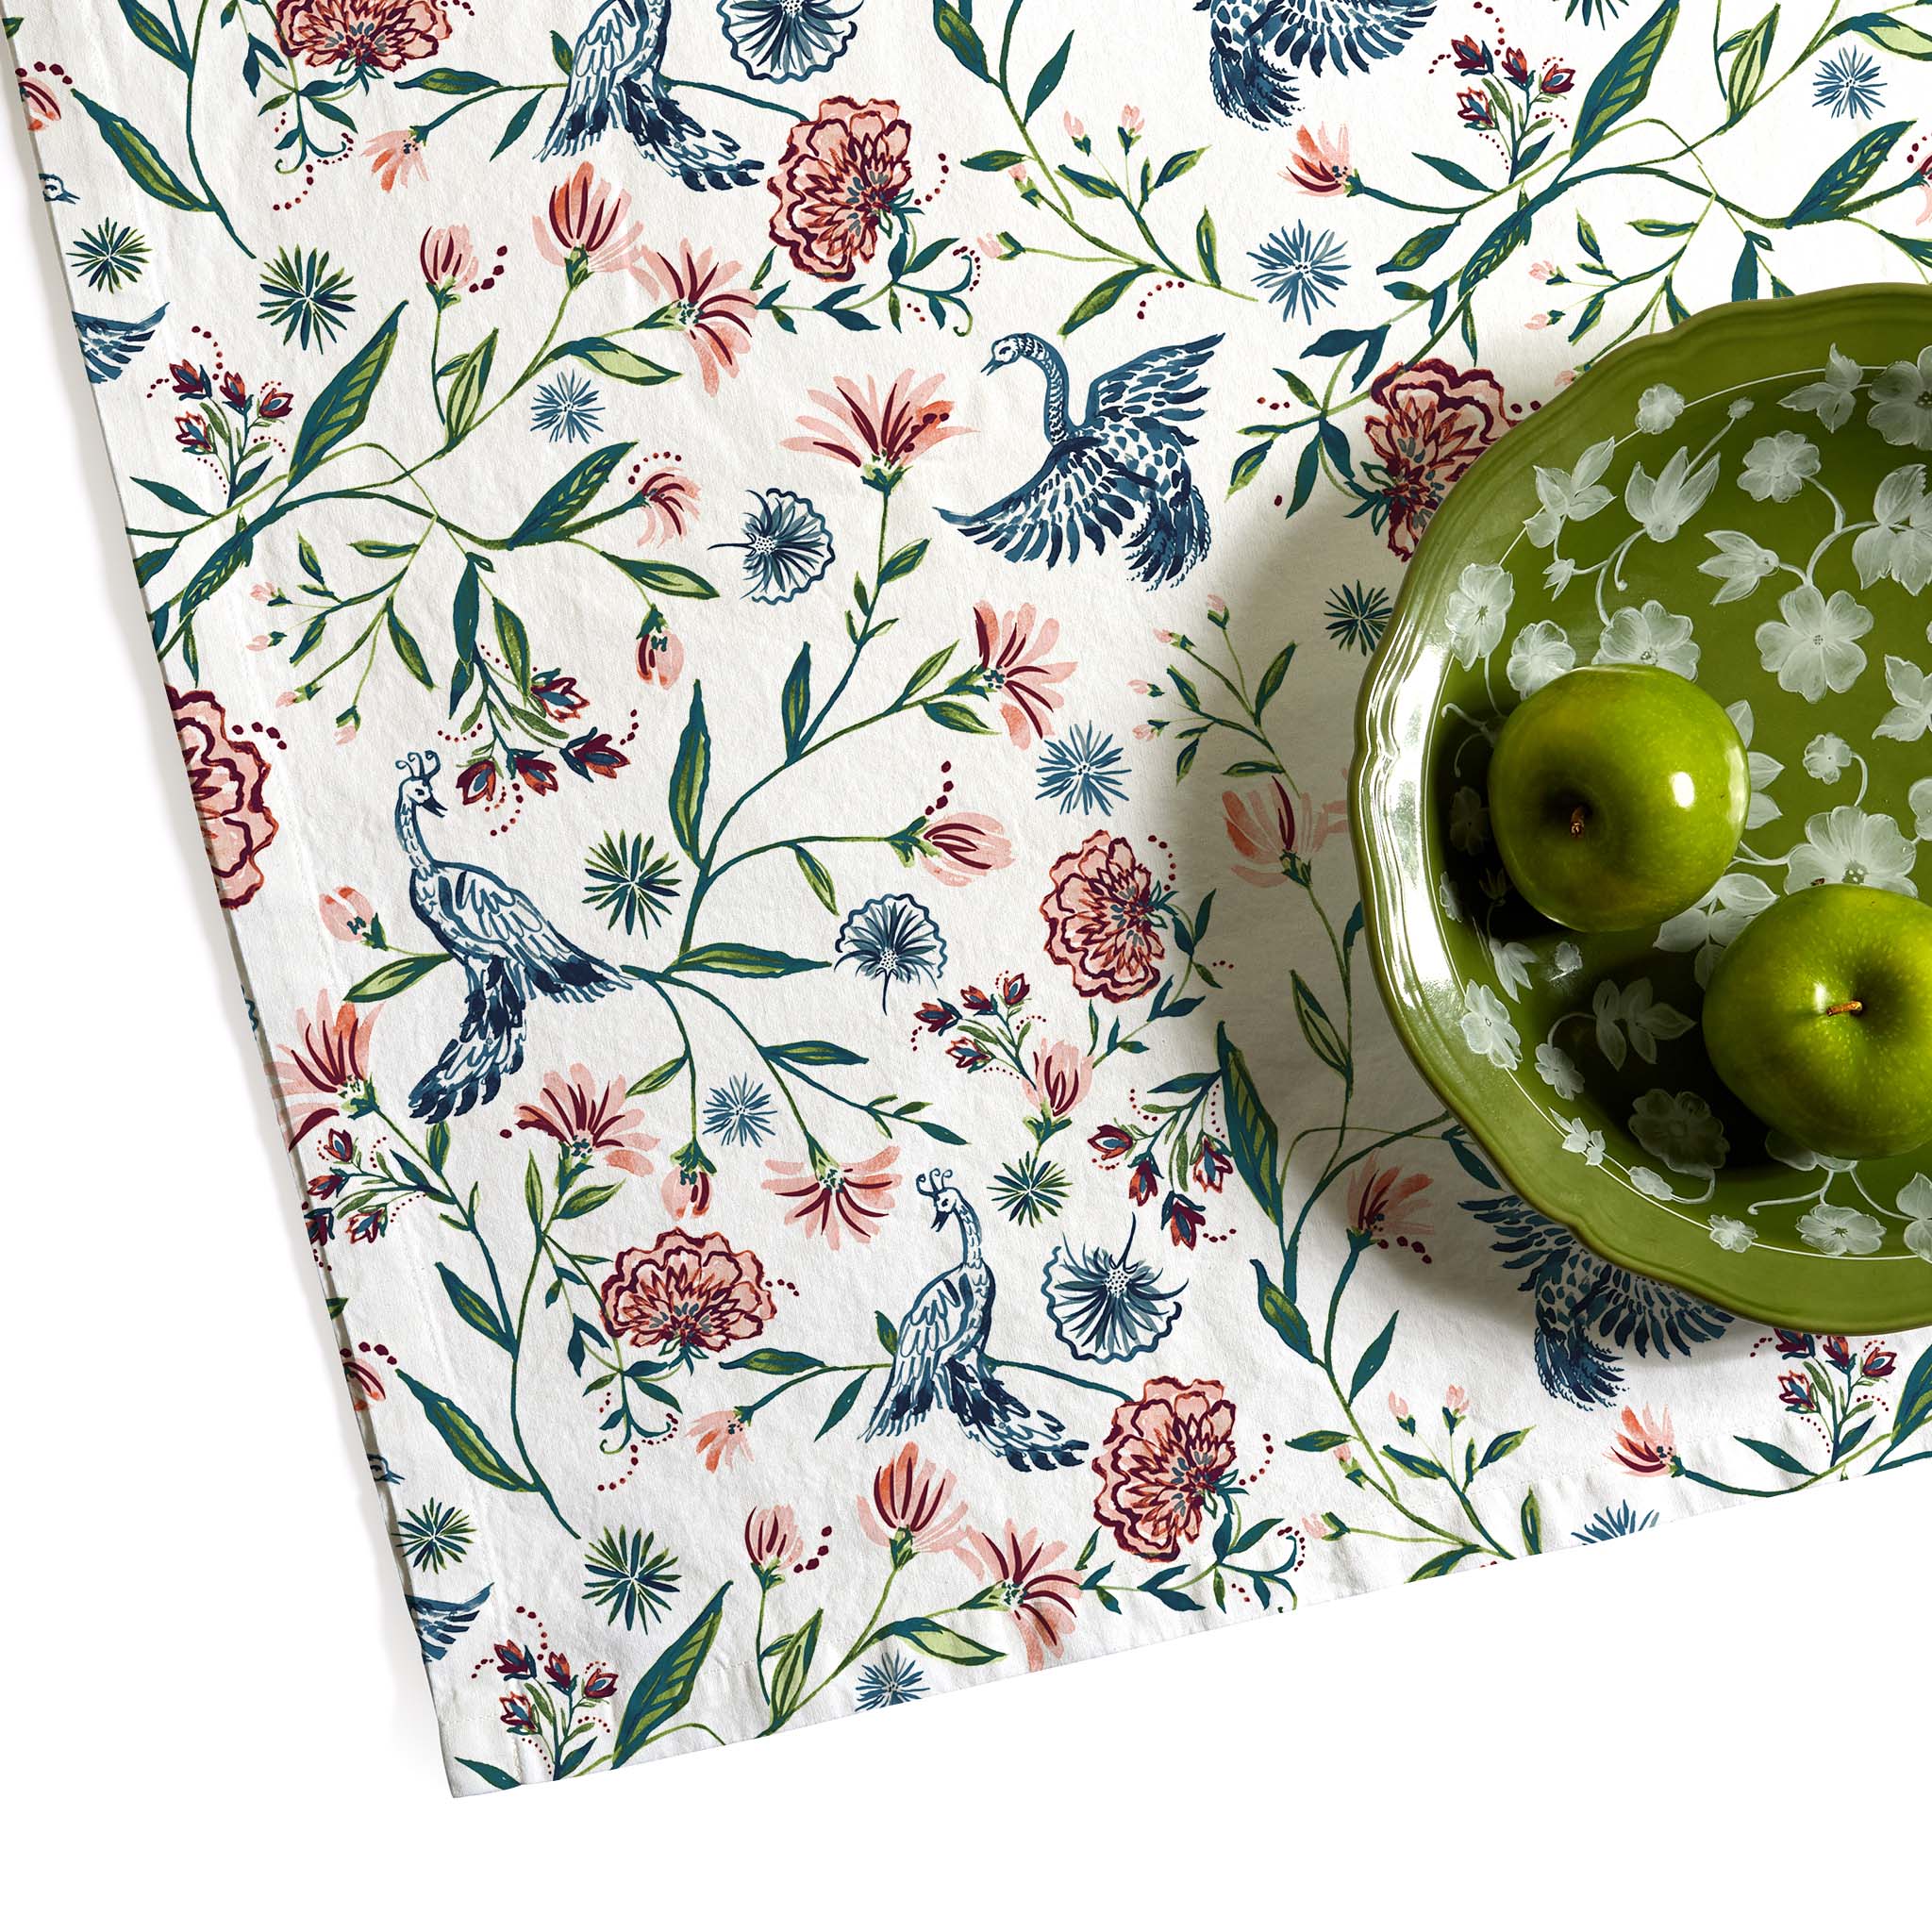 Cream Chinoiserie Printed Tablecloth Close-Up with two apples inside a green floral plate